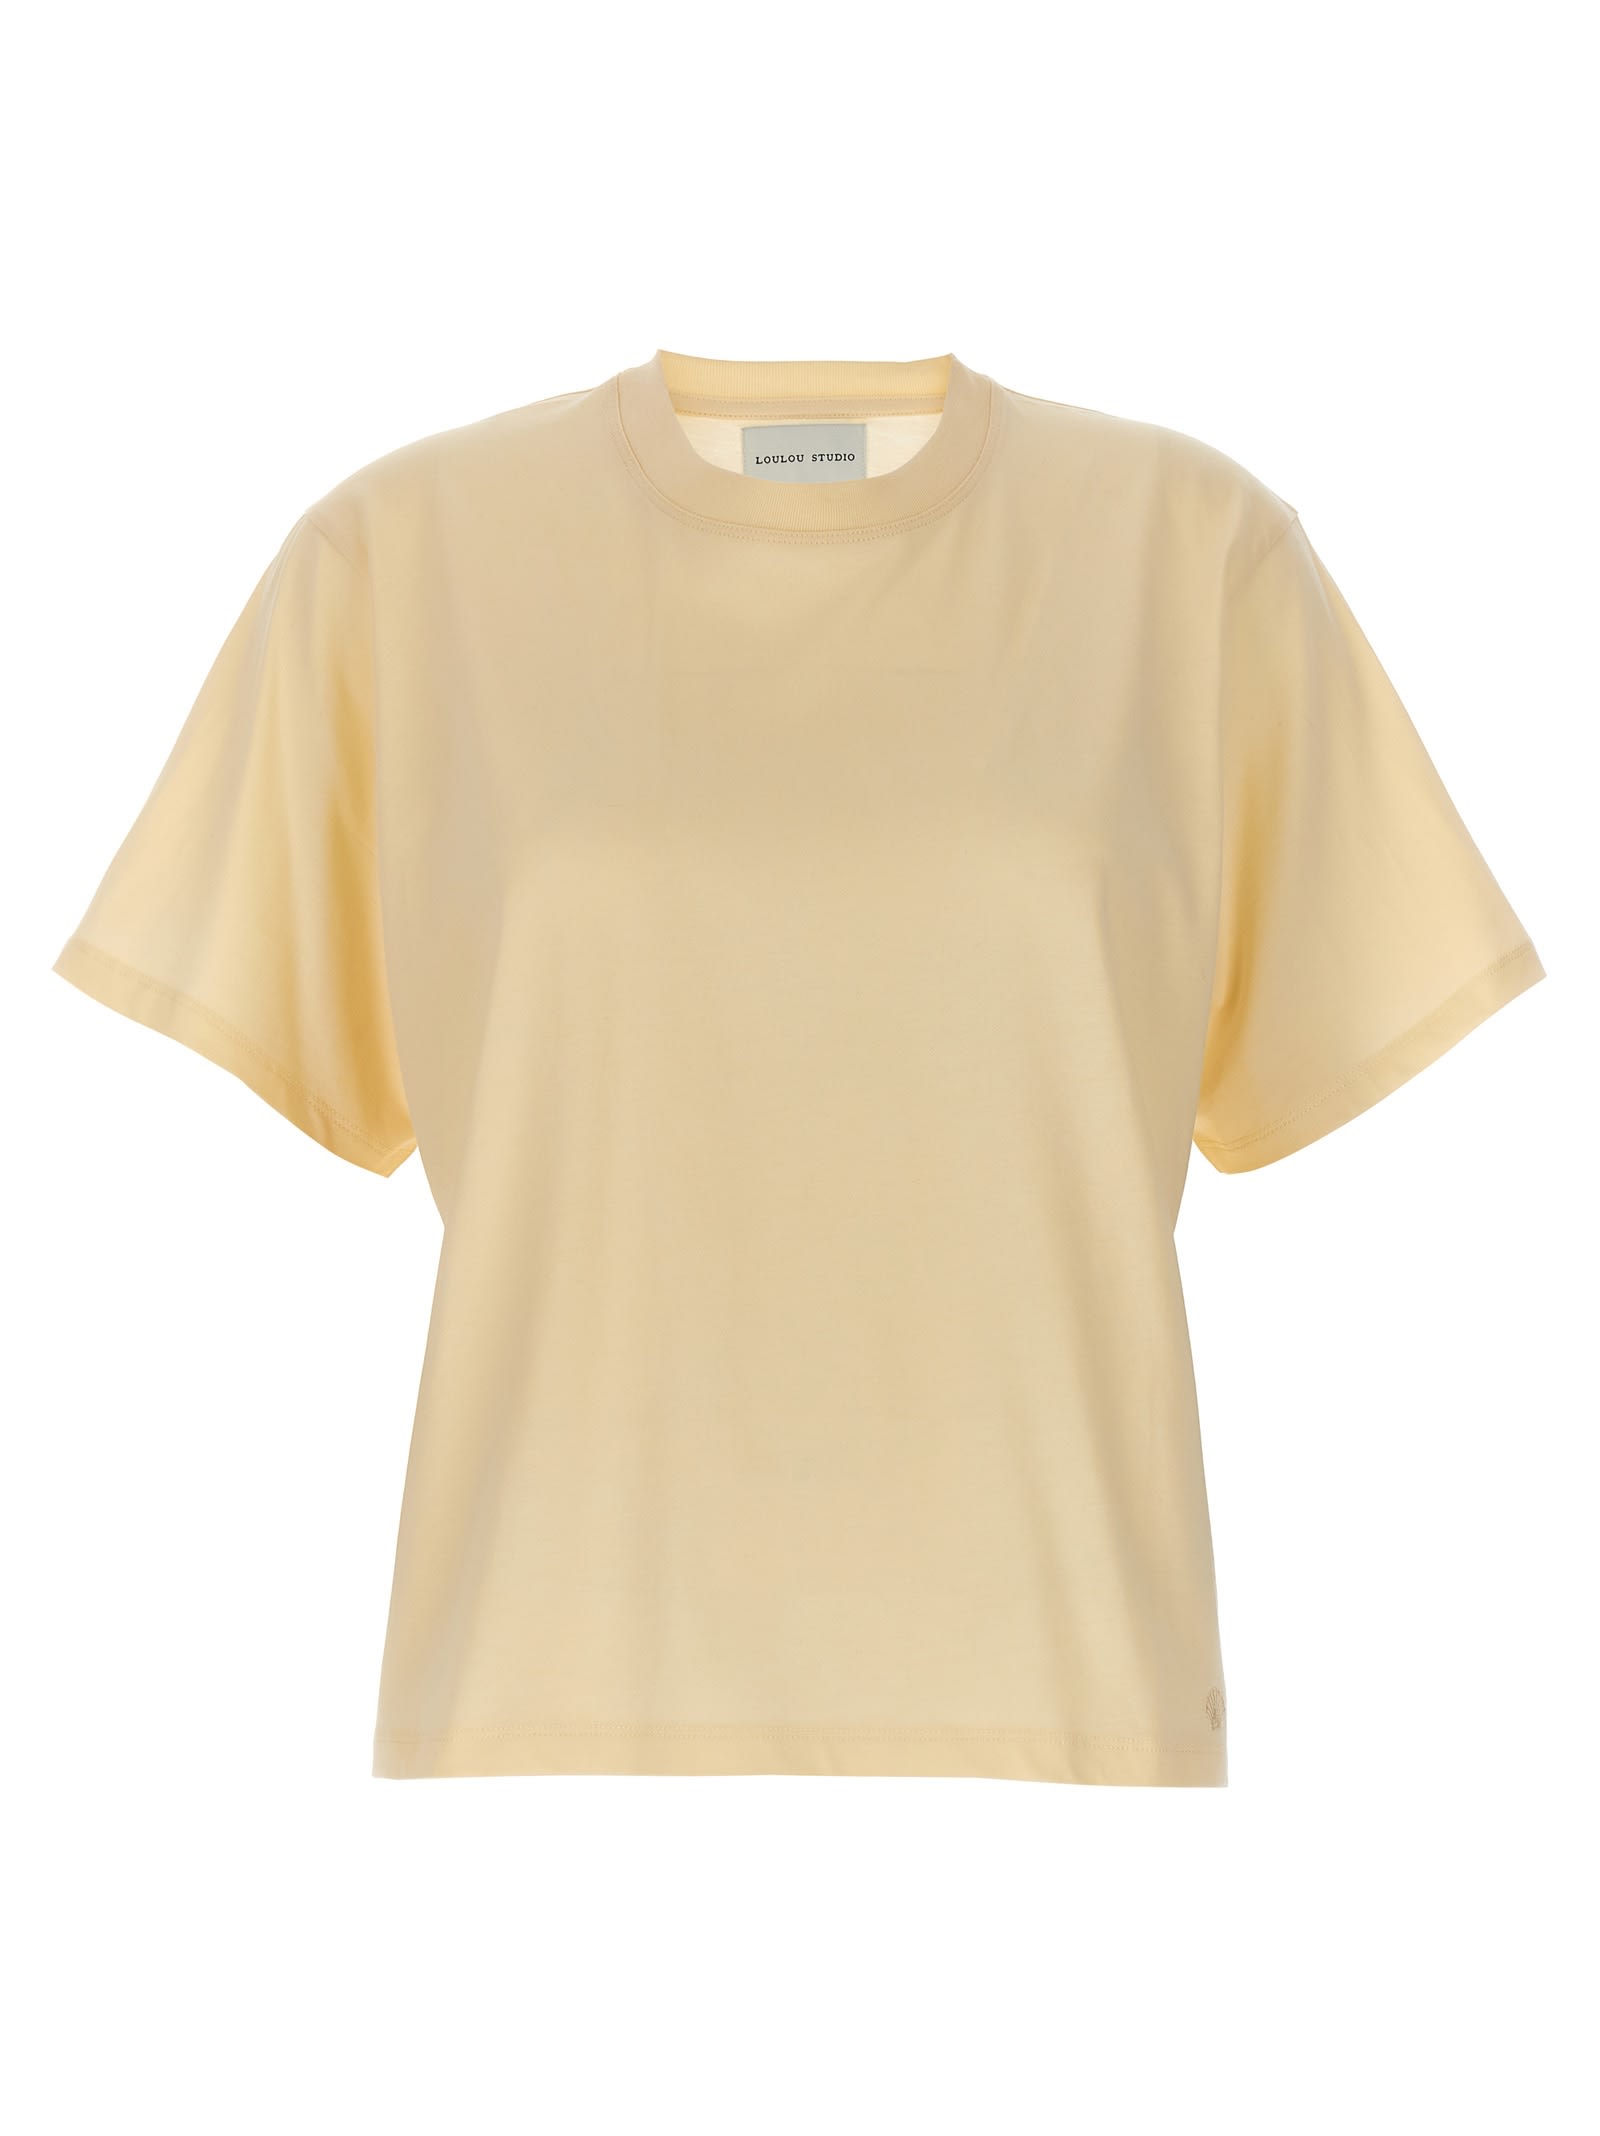 Shop Loulou Studio Crew-neck T-shirt In Rice Ivory